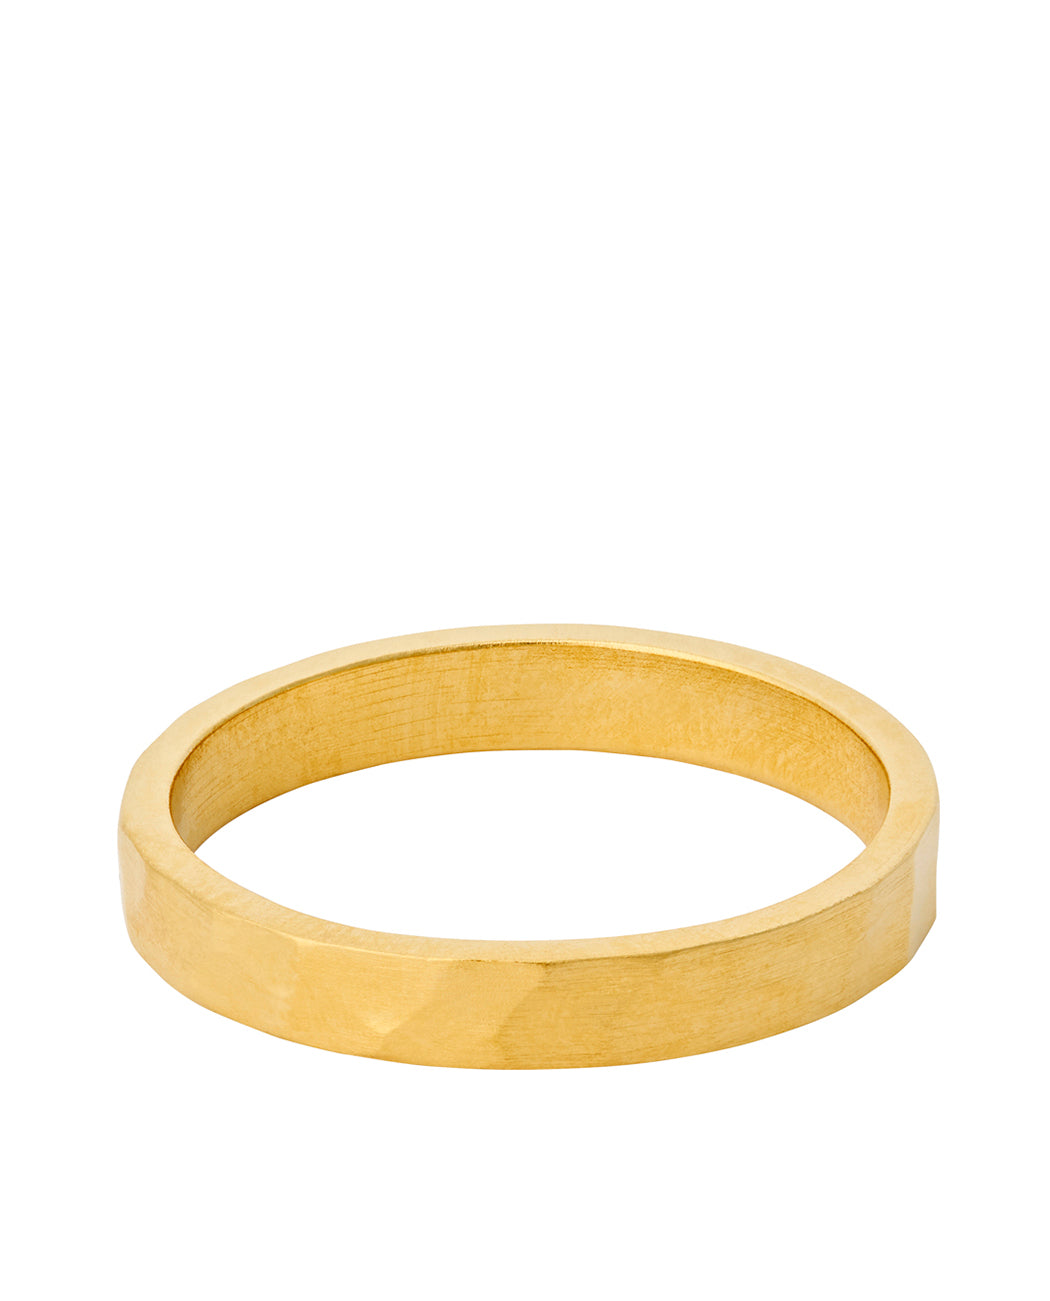 Pernille Corydon Pine Ring Gold Silver Sustainable Jewelry Denmark NL Europe